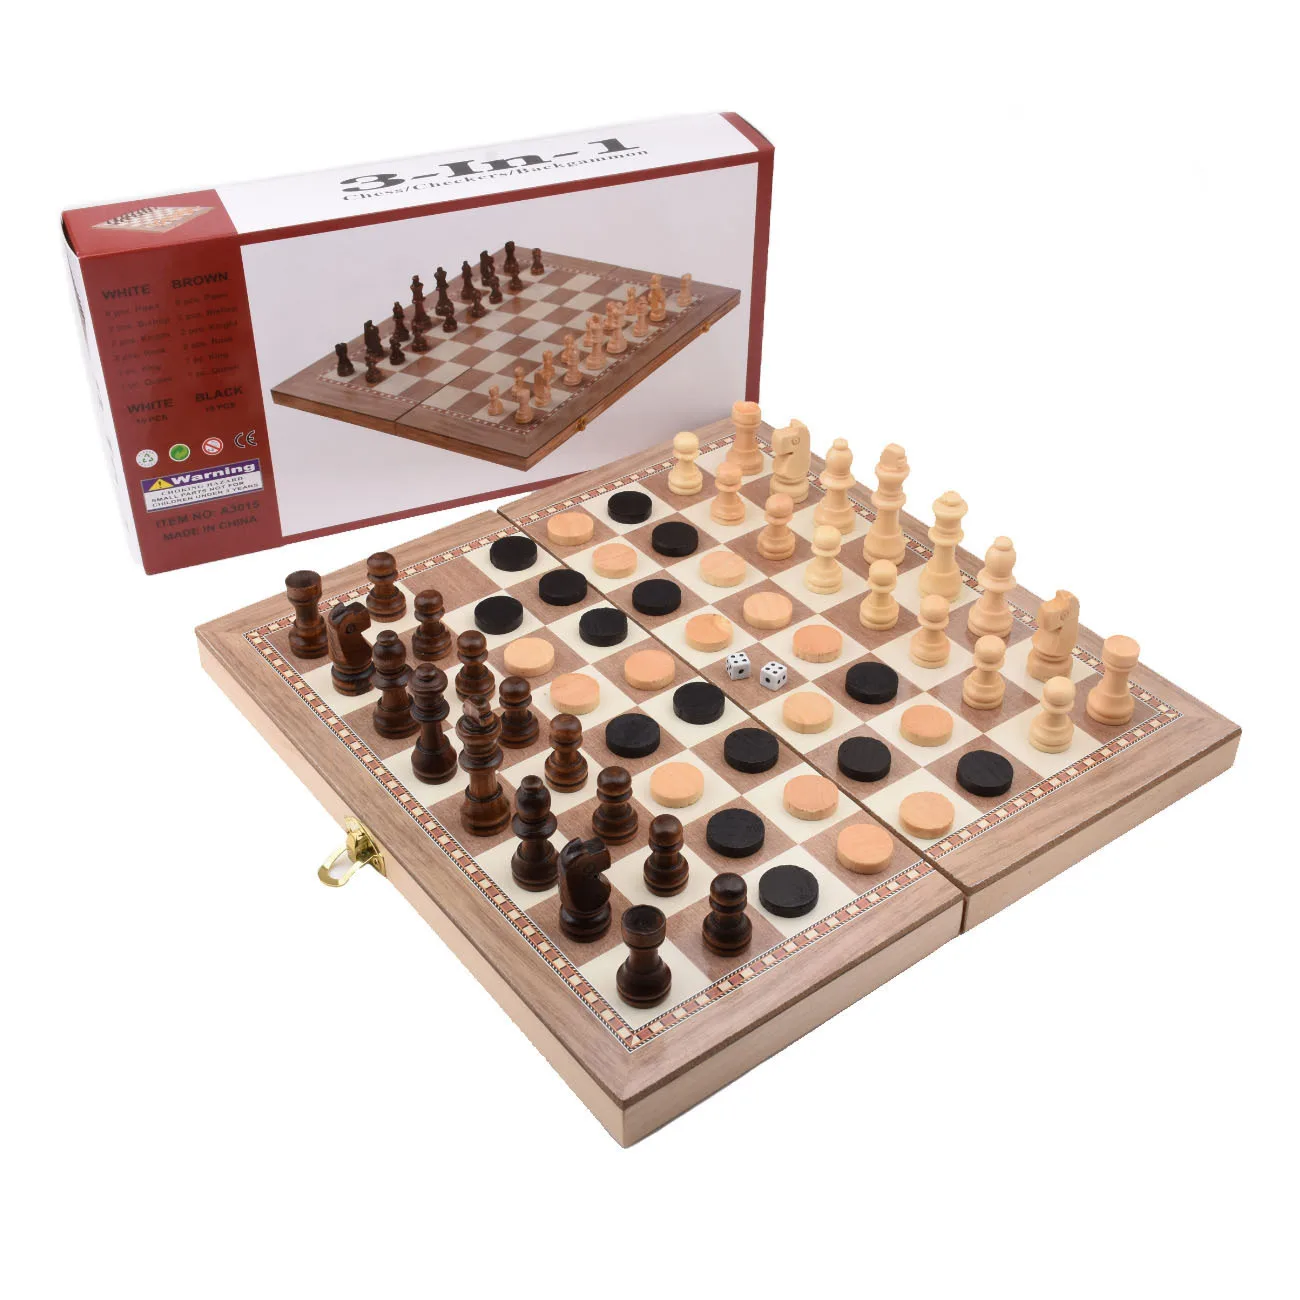 Hot wholesale Wooden chess board game new toys wooden chess set wooden chess pieces